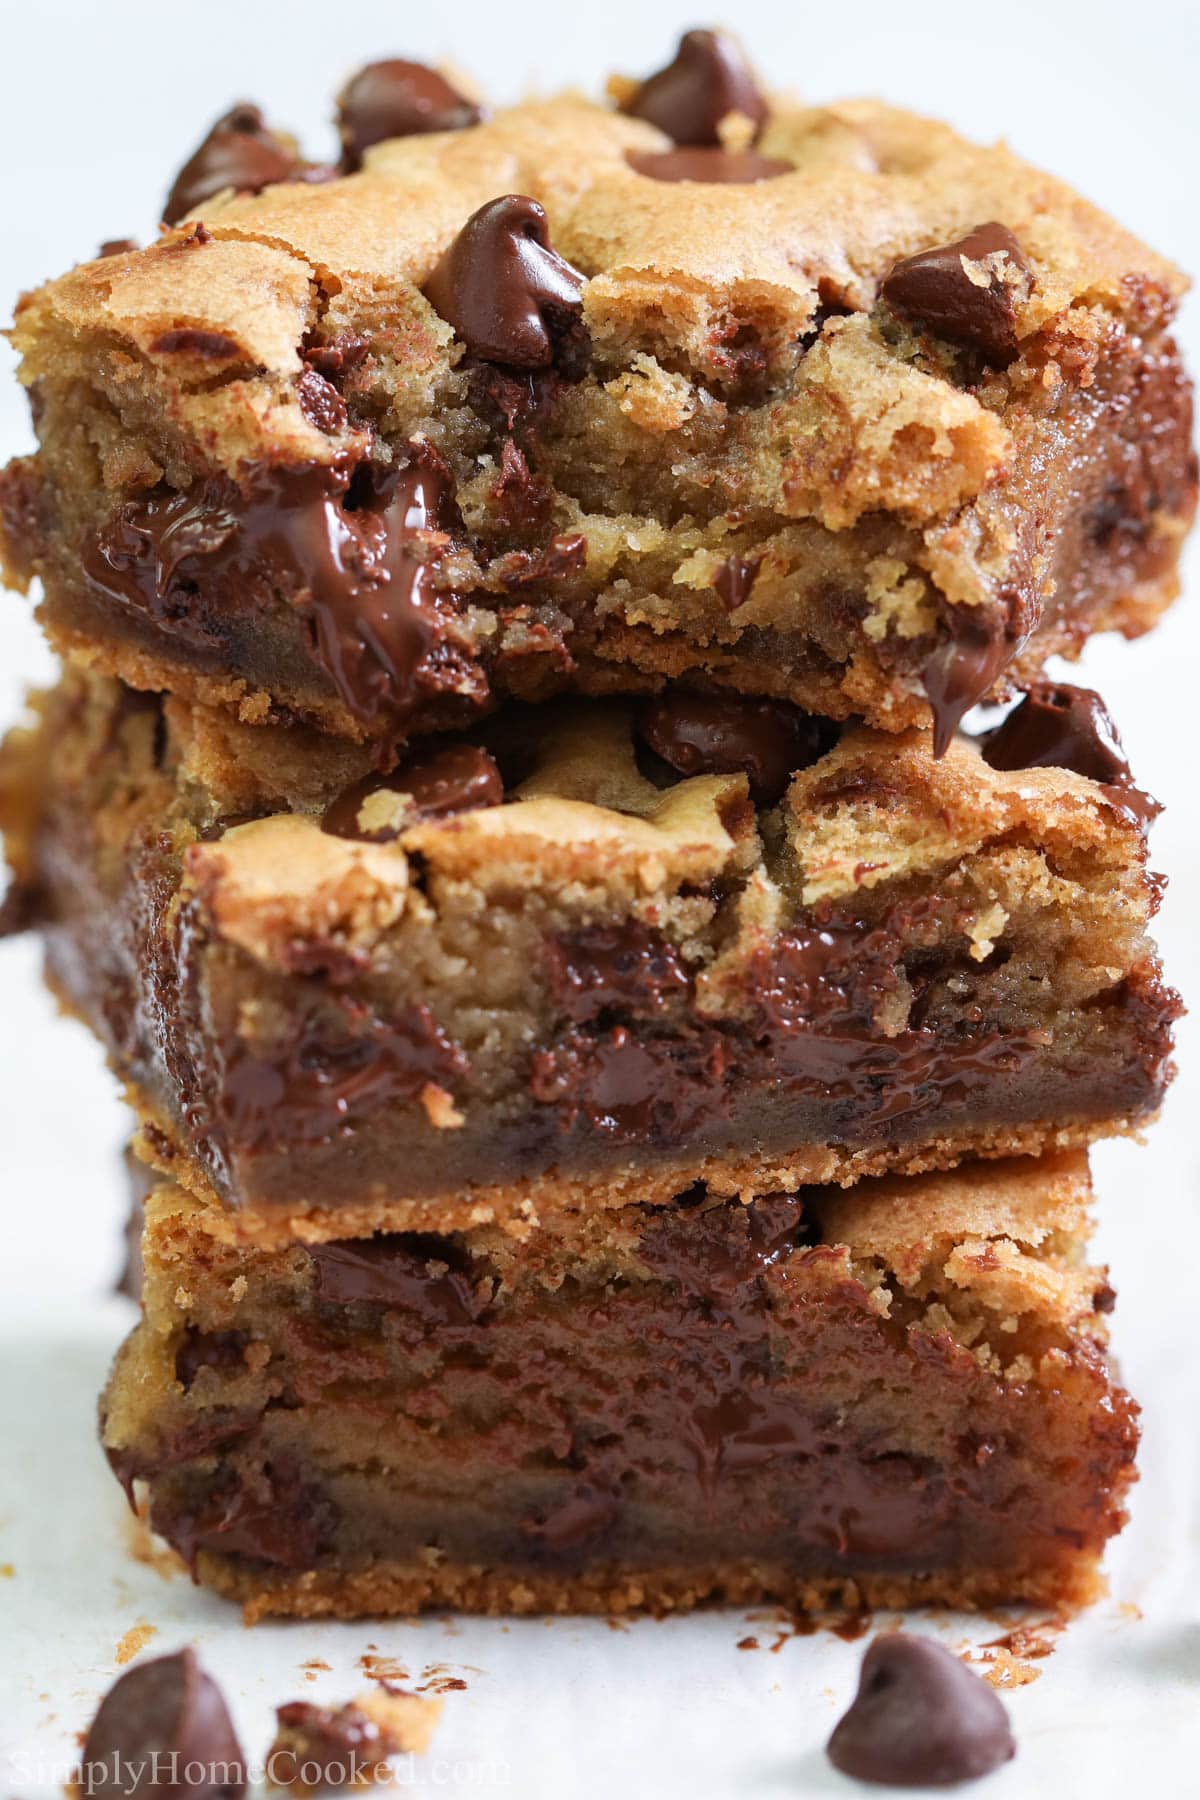 Vertical close up image of Chocolate Chip Cookie Bars stacked and one missing a bite